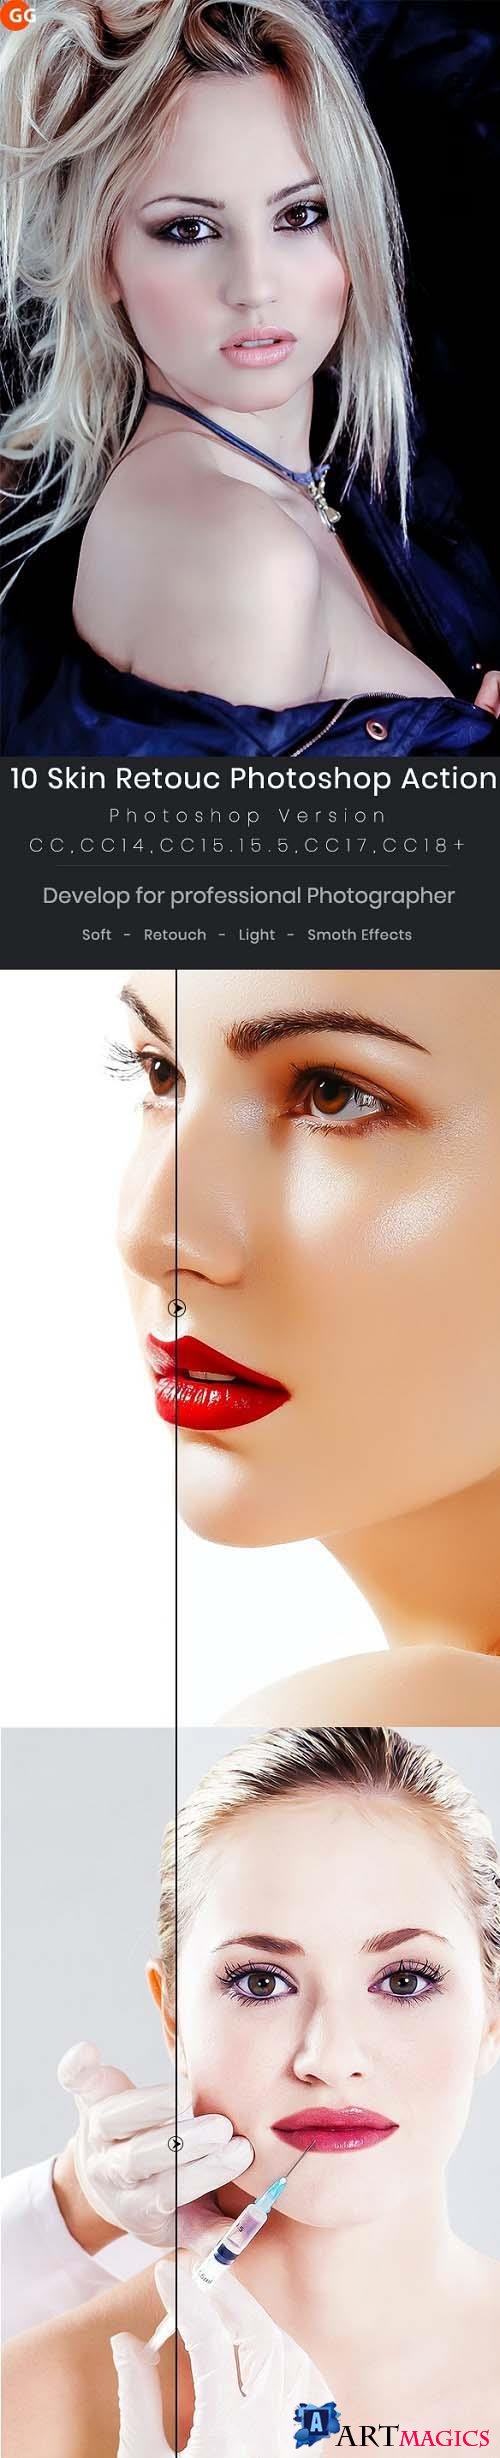 10 Skin Retouch Photoshop Action - 21648340